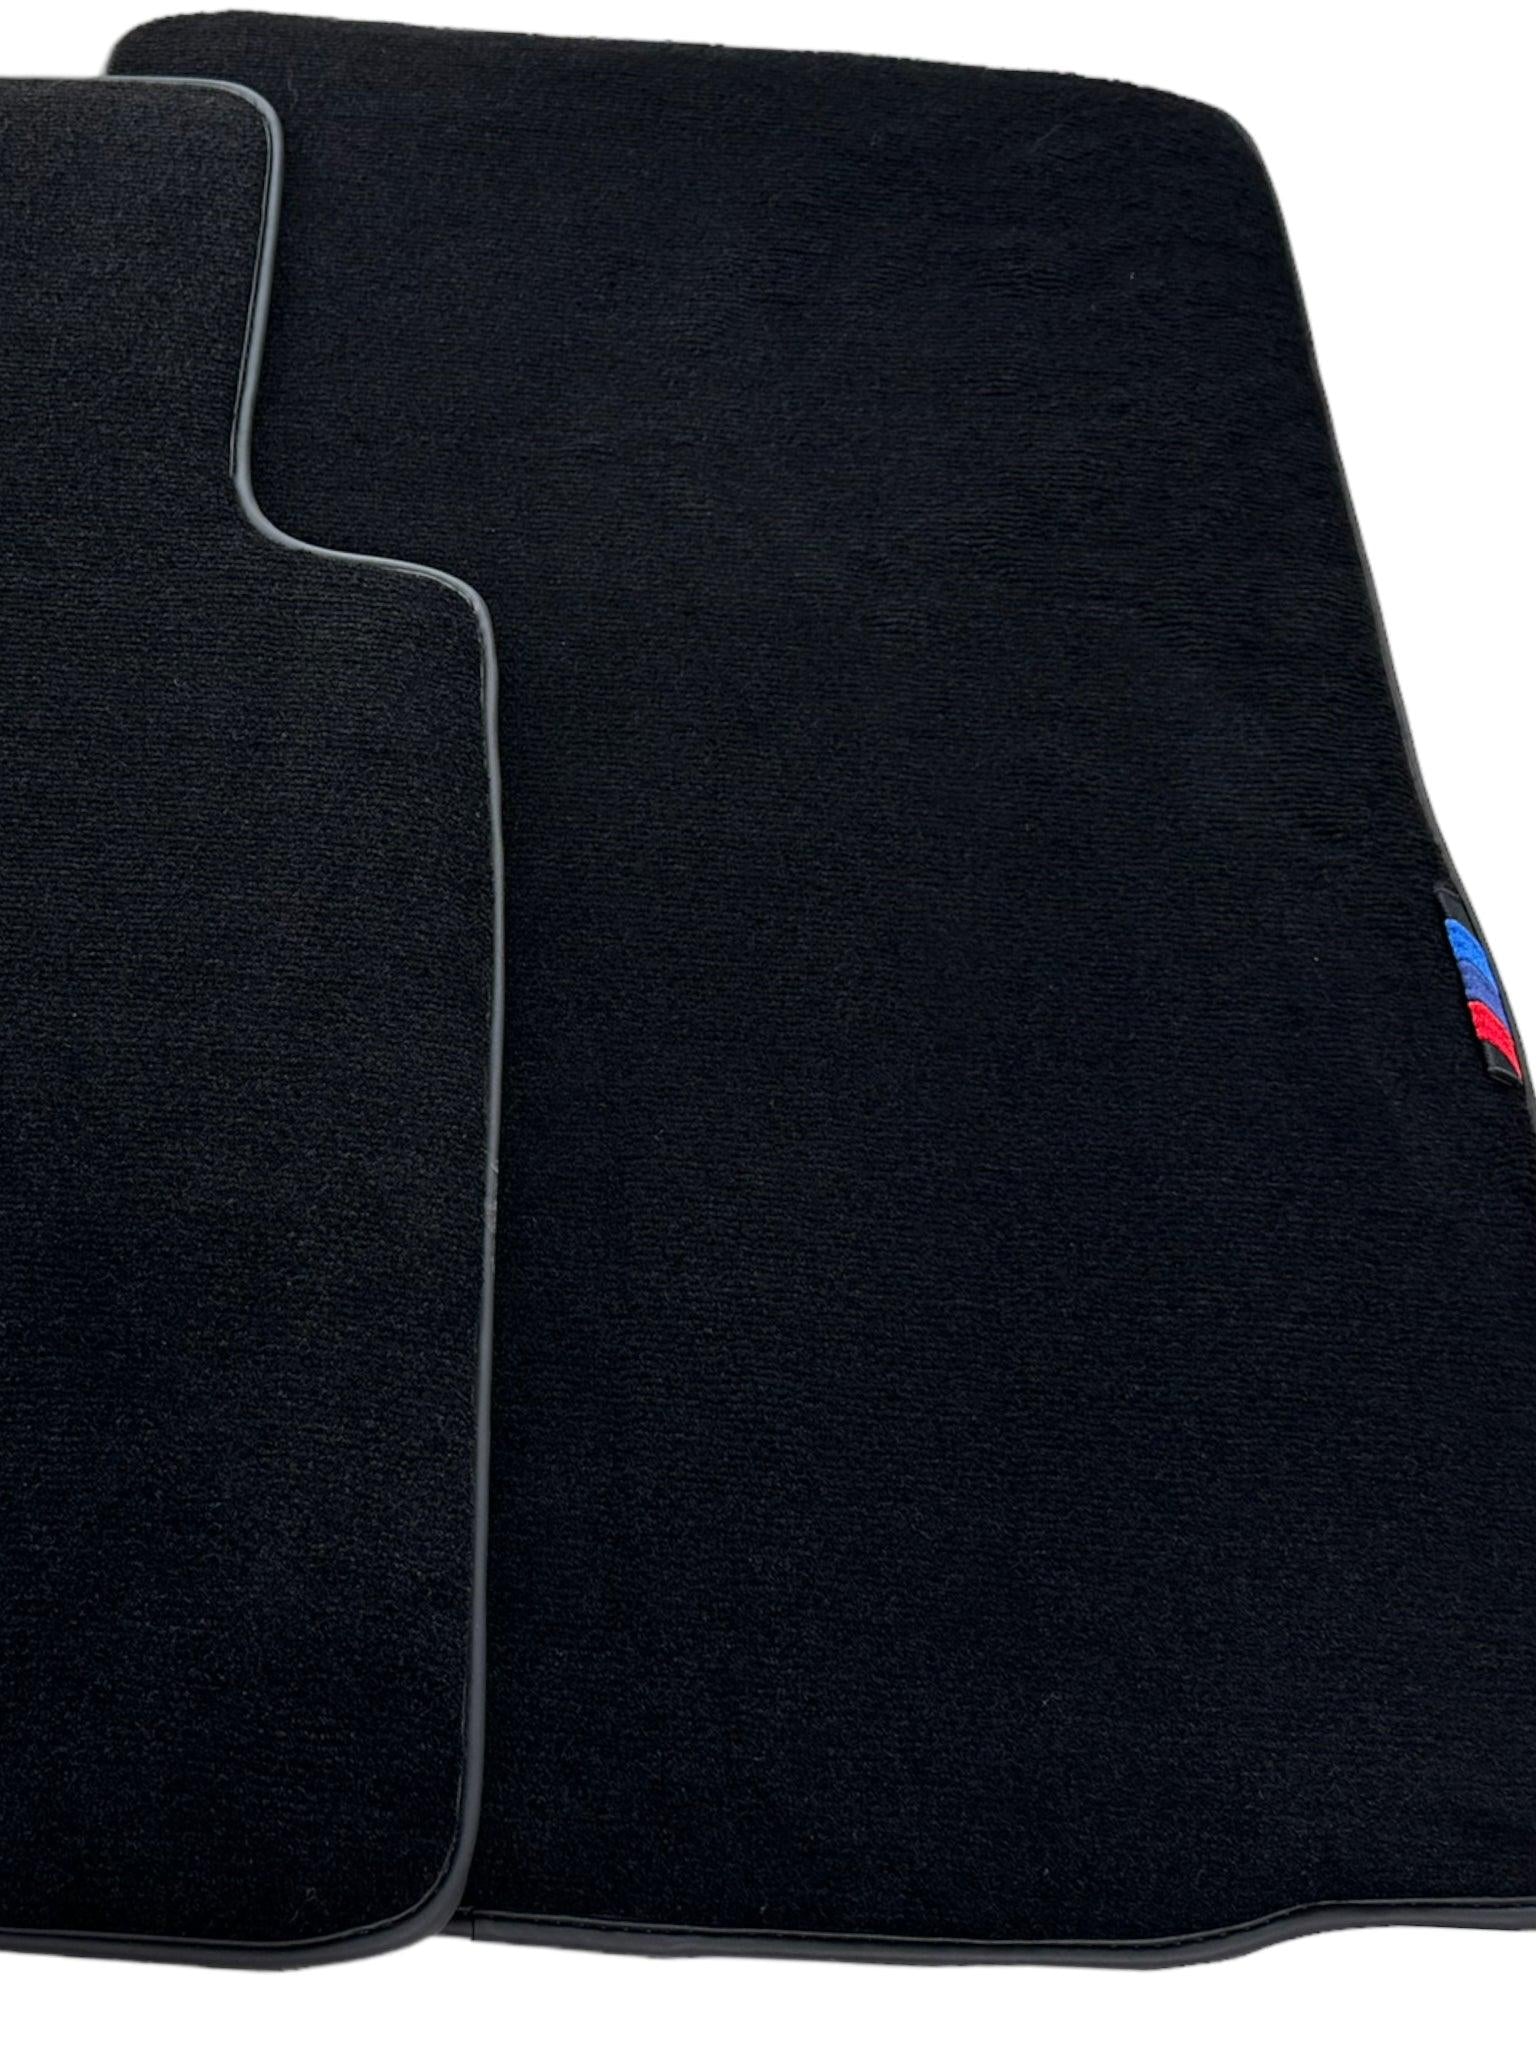 Black Floor Mats For BMW Z4 Series G29 With 3 Color Stripes Tailored Set Perfect Fit - AutoWin